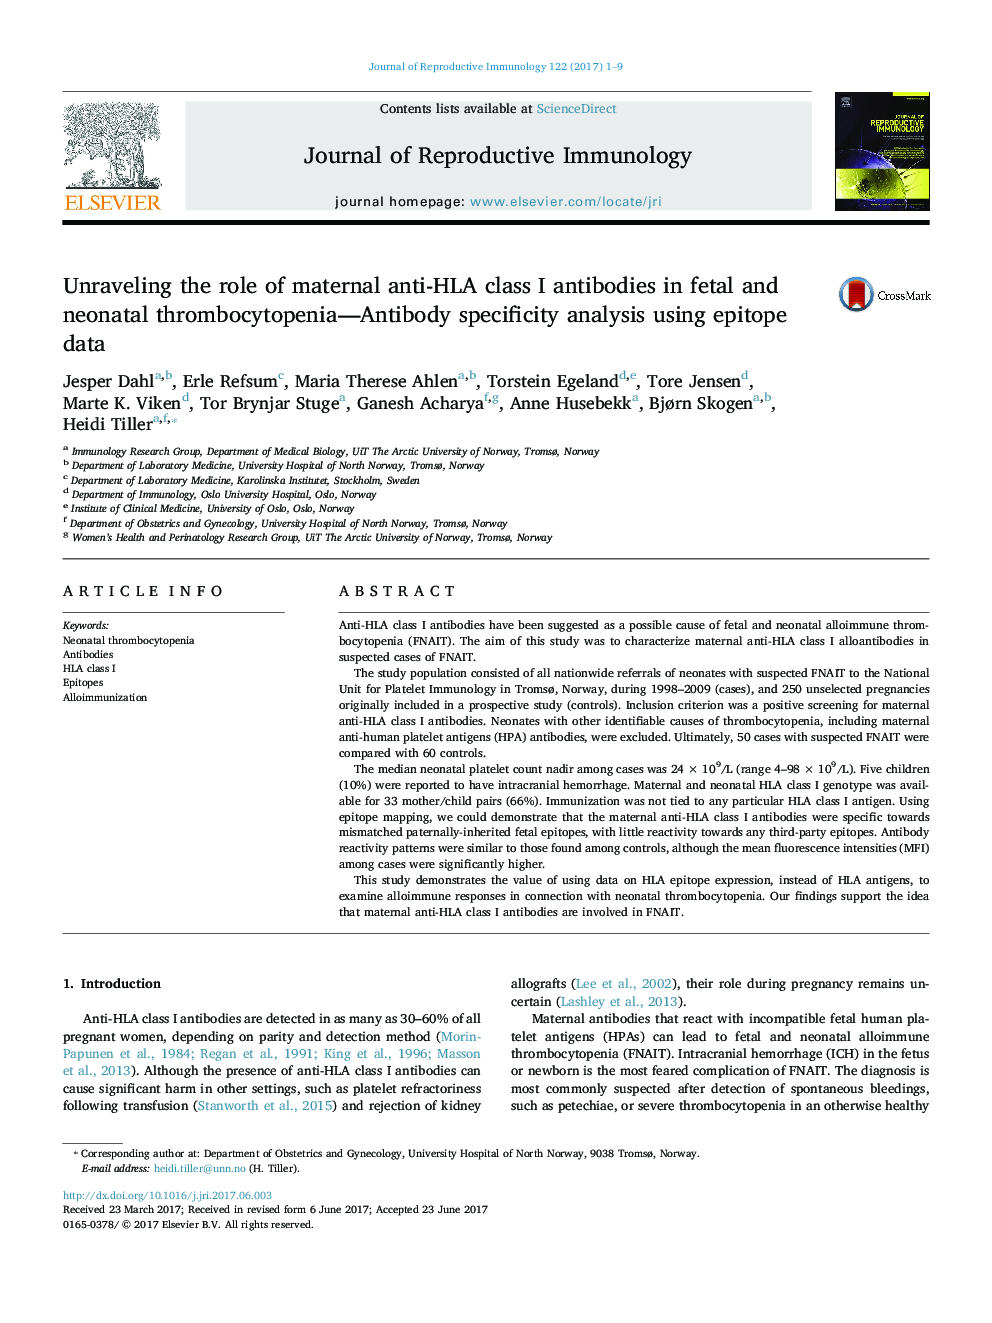 Unraveling the role of maternal anti-HLA class I antibodies in fetal and neonatal thrombocytopenia-Antibody specificity analysis using epitope data